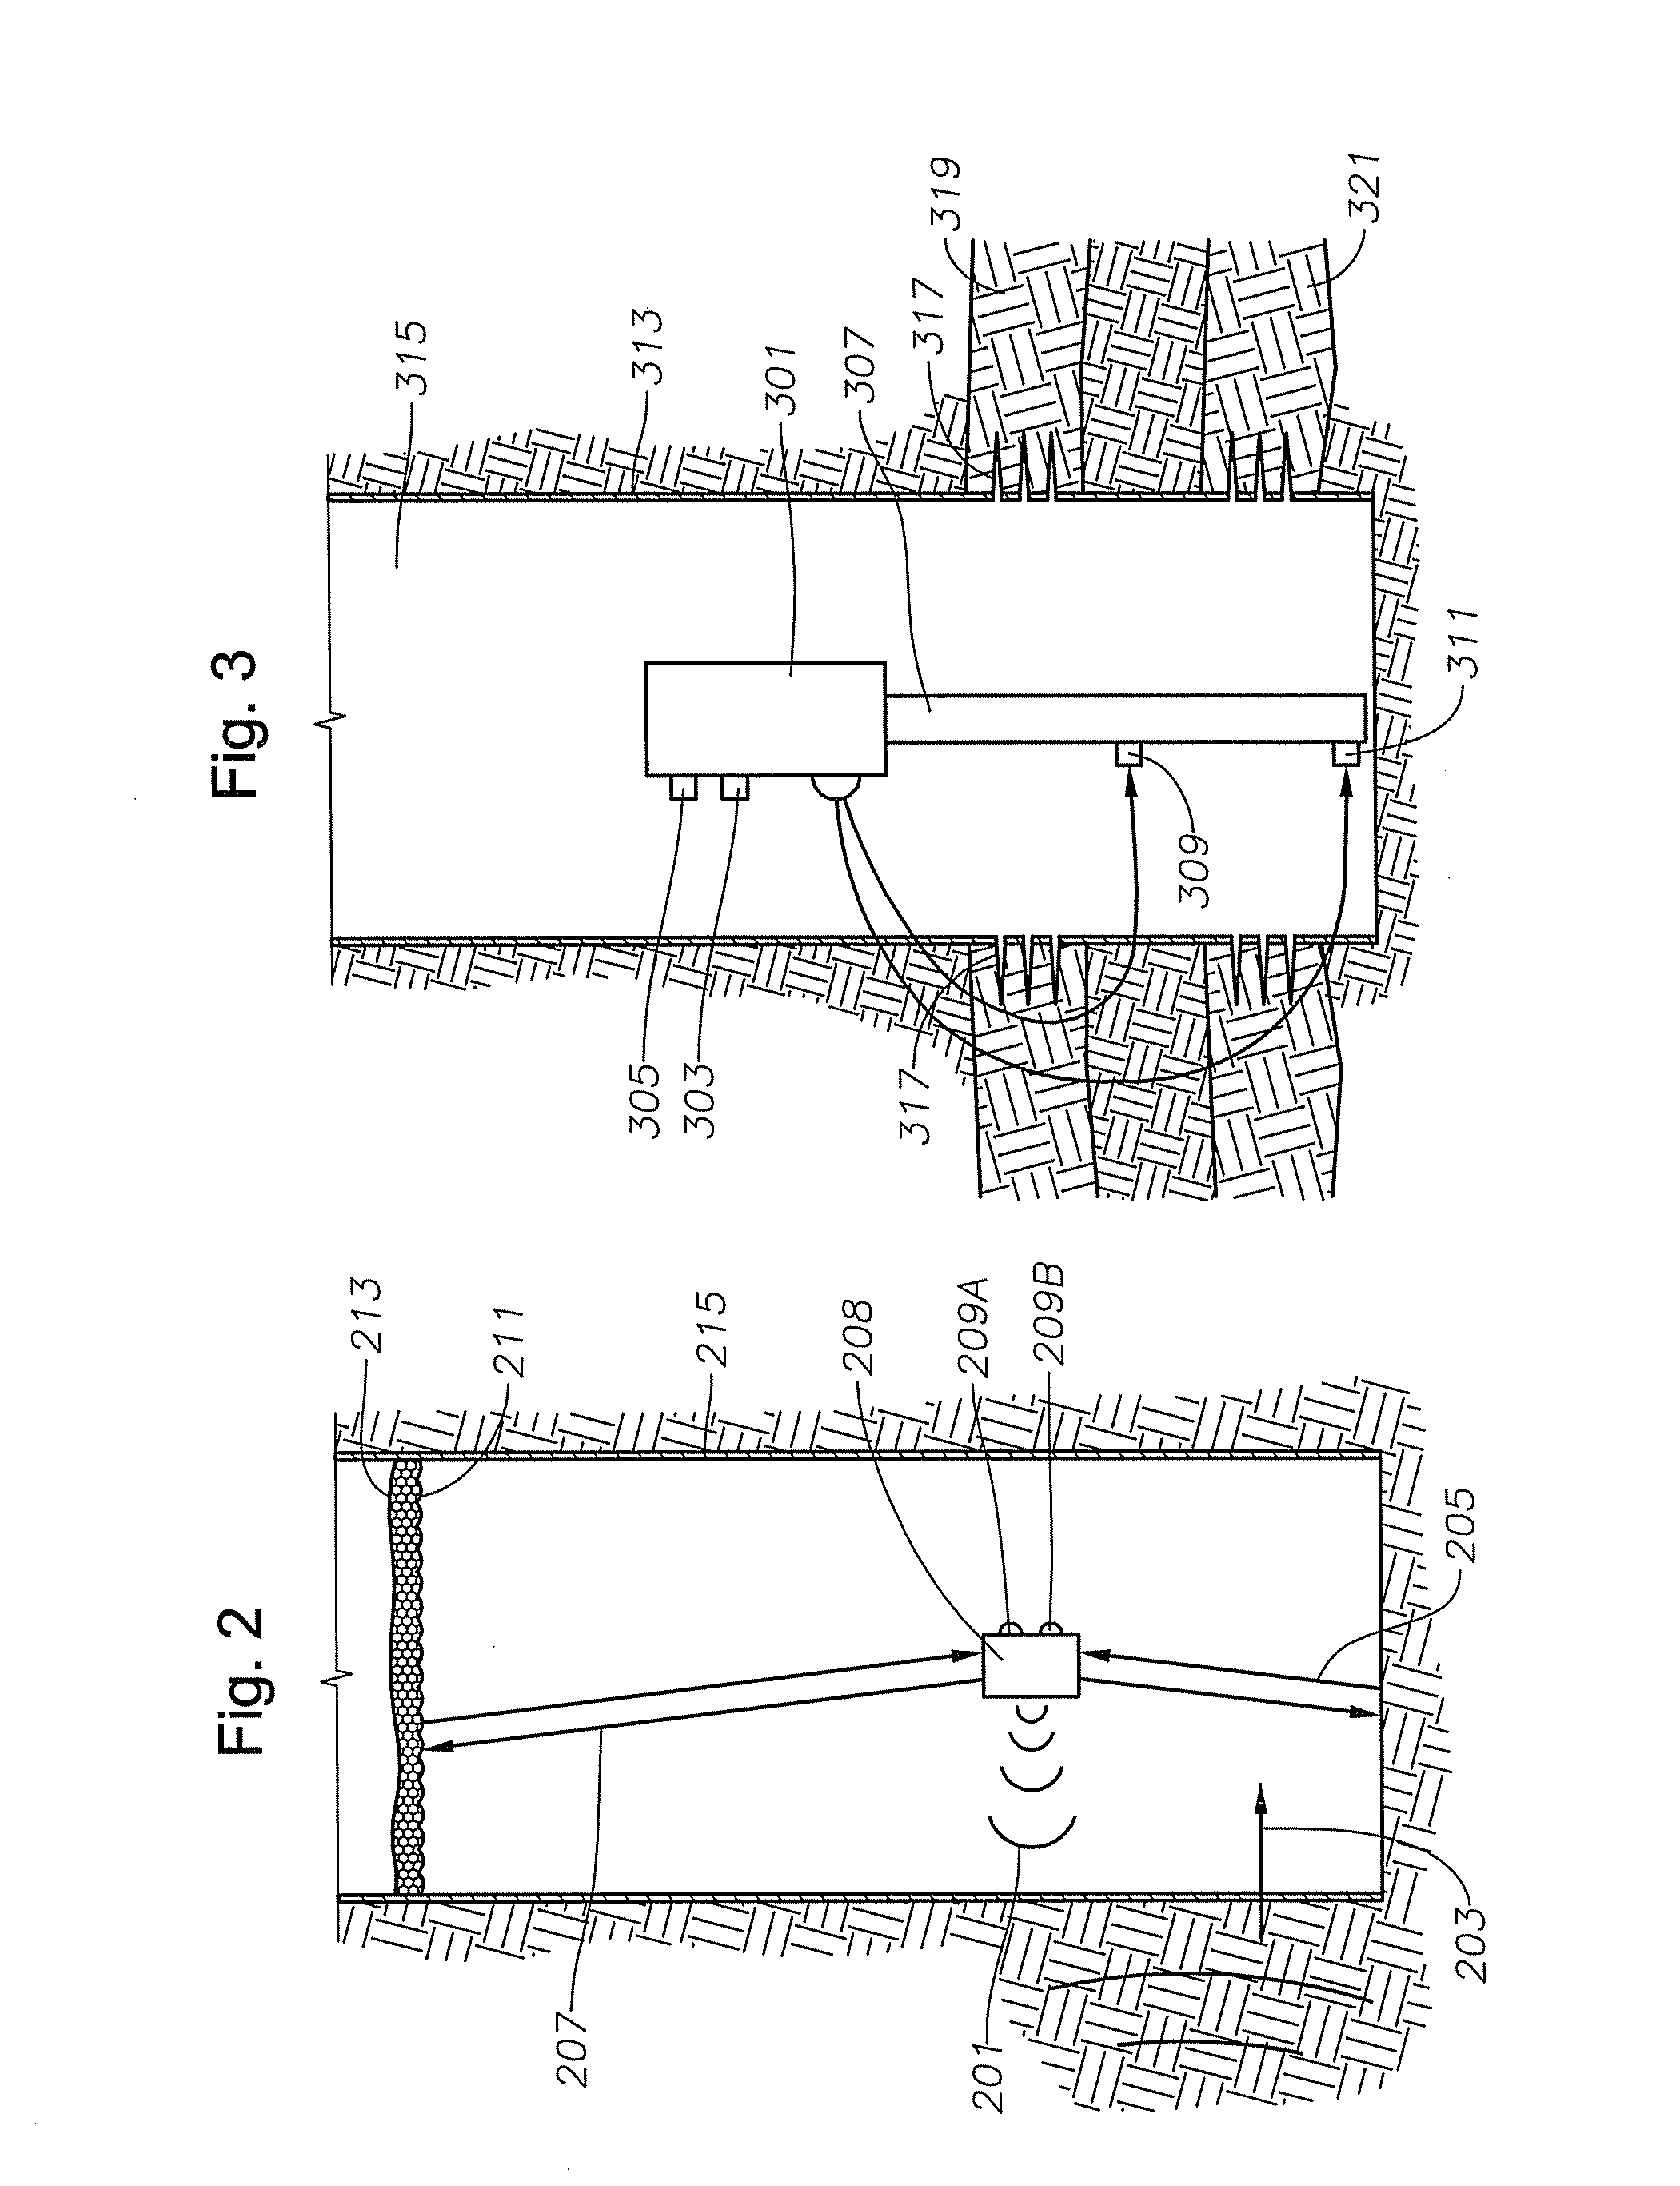 Using An Acoustic Ping and Sonic Velocity to Control an Artificial Lift Device